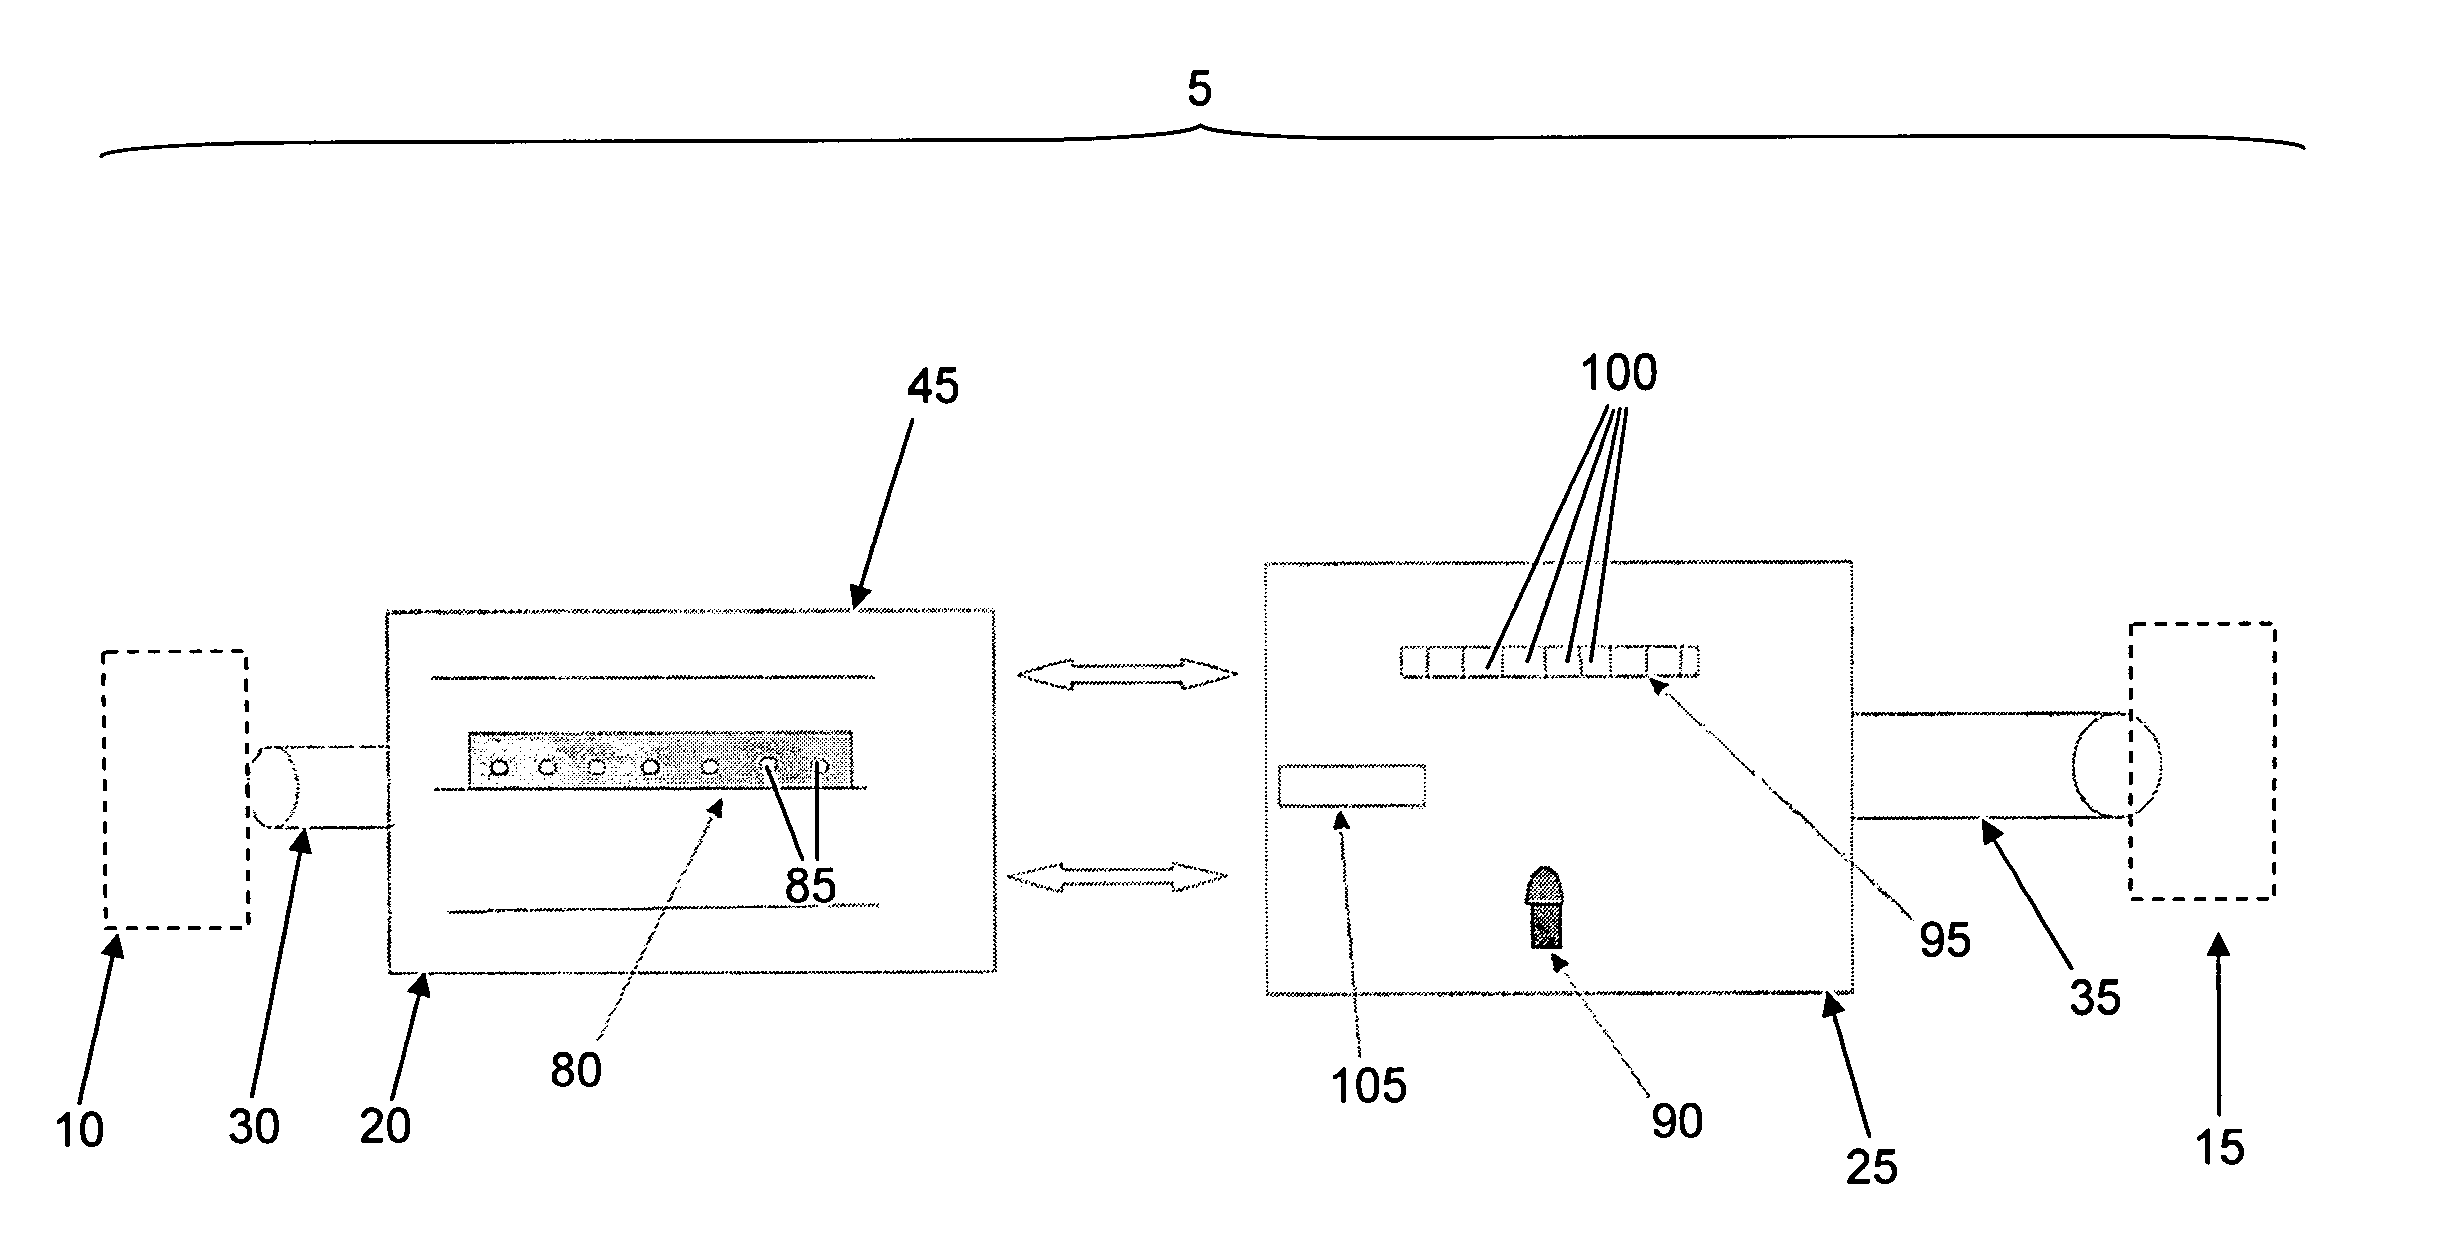 Disposable needle electrode with identification, and alterable, connector interface